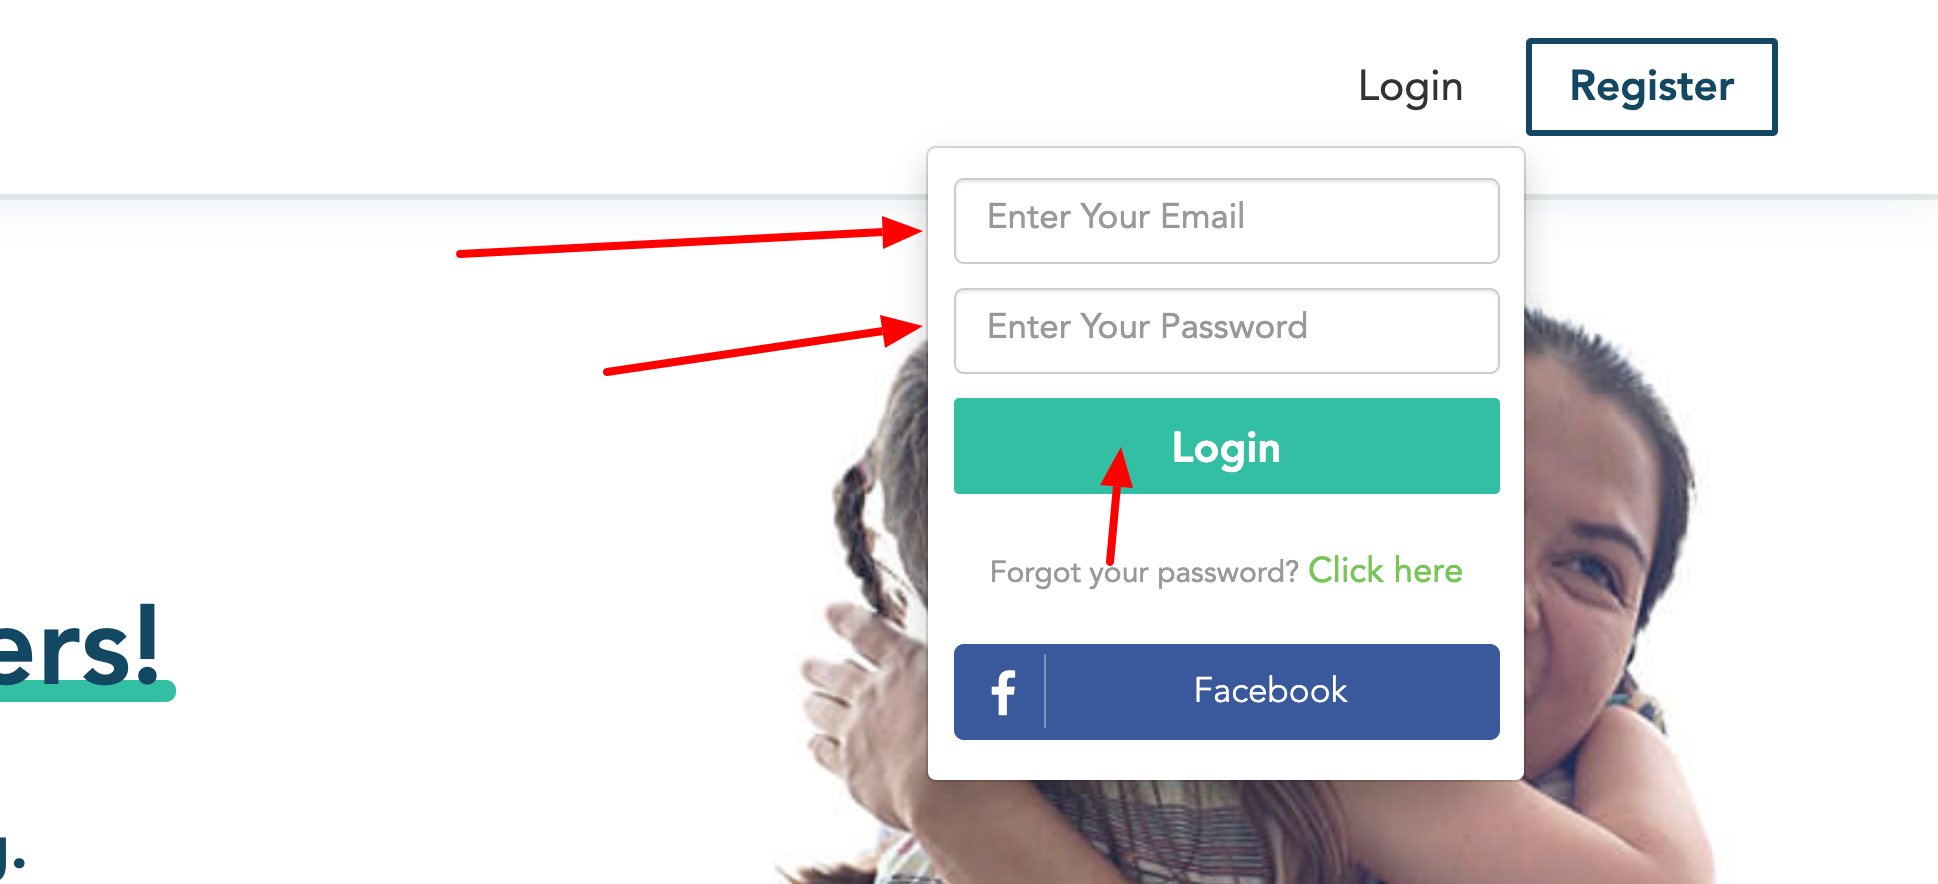 click login using your username and passsword